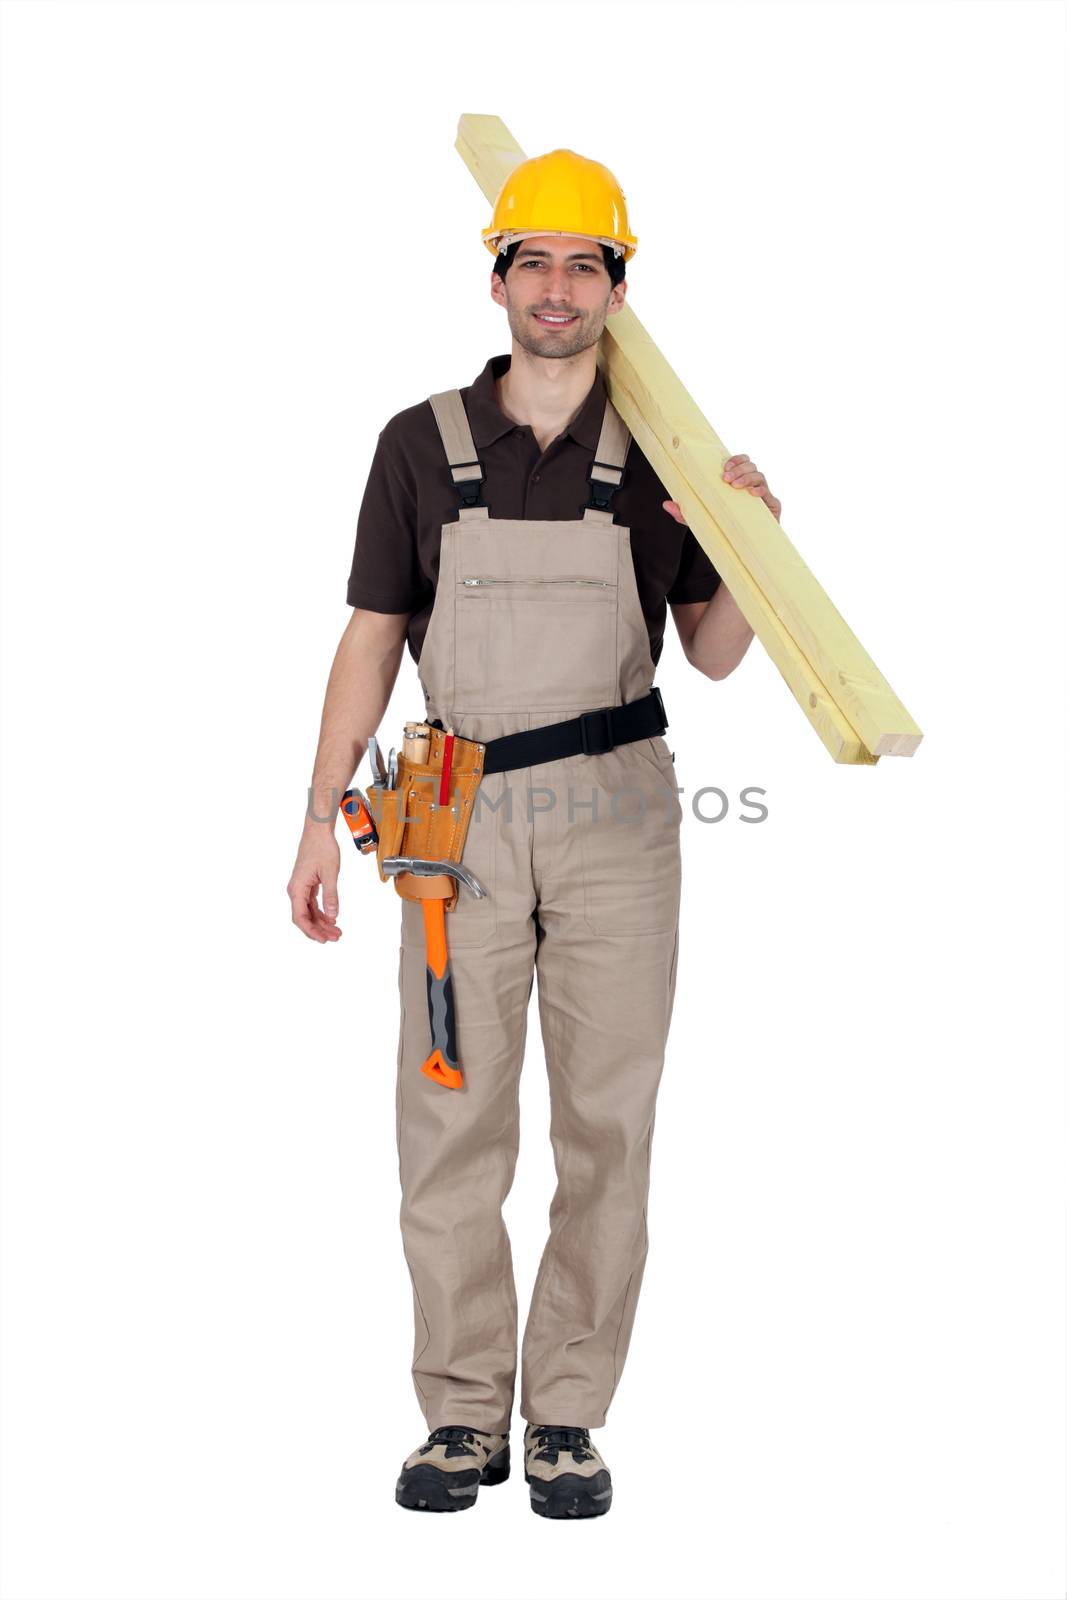 A builder carrying wooden planks by phovoir